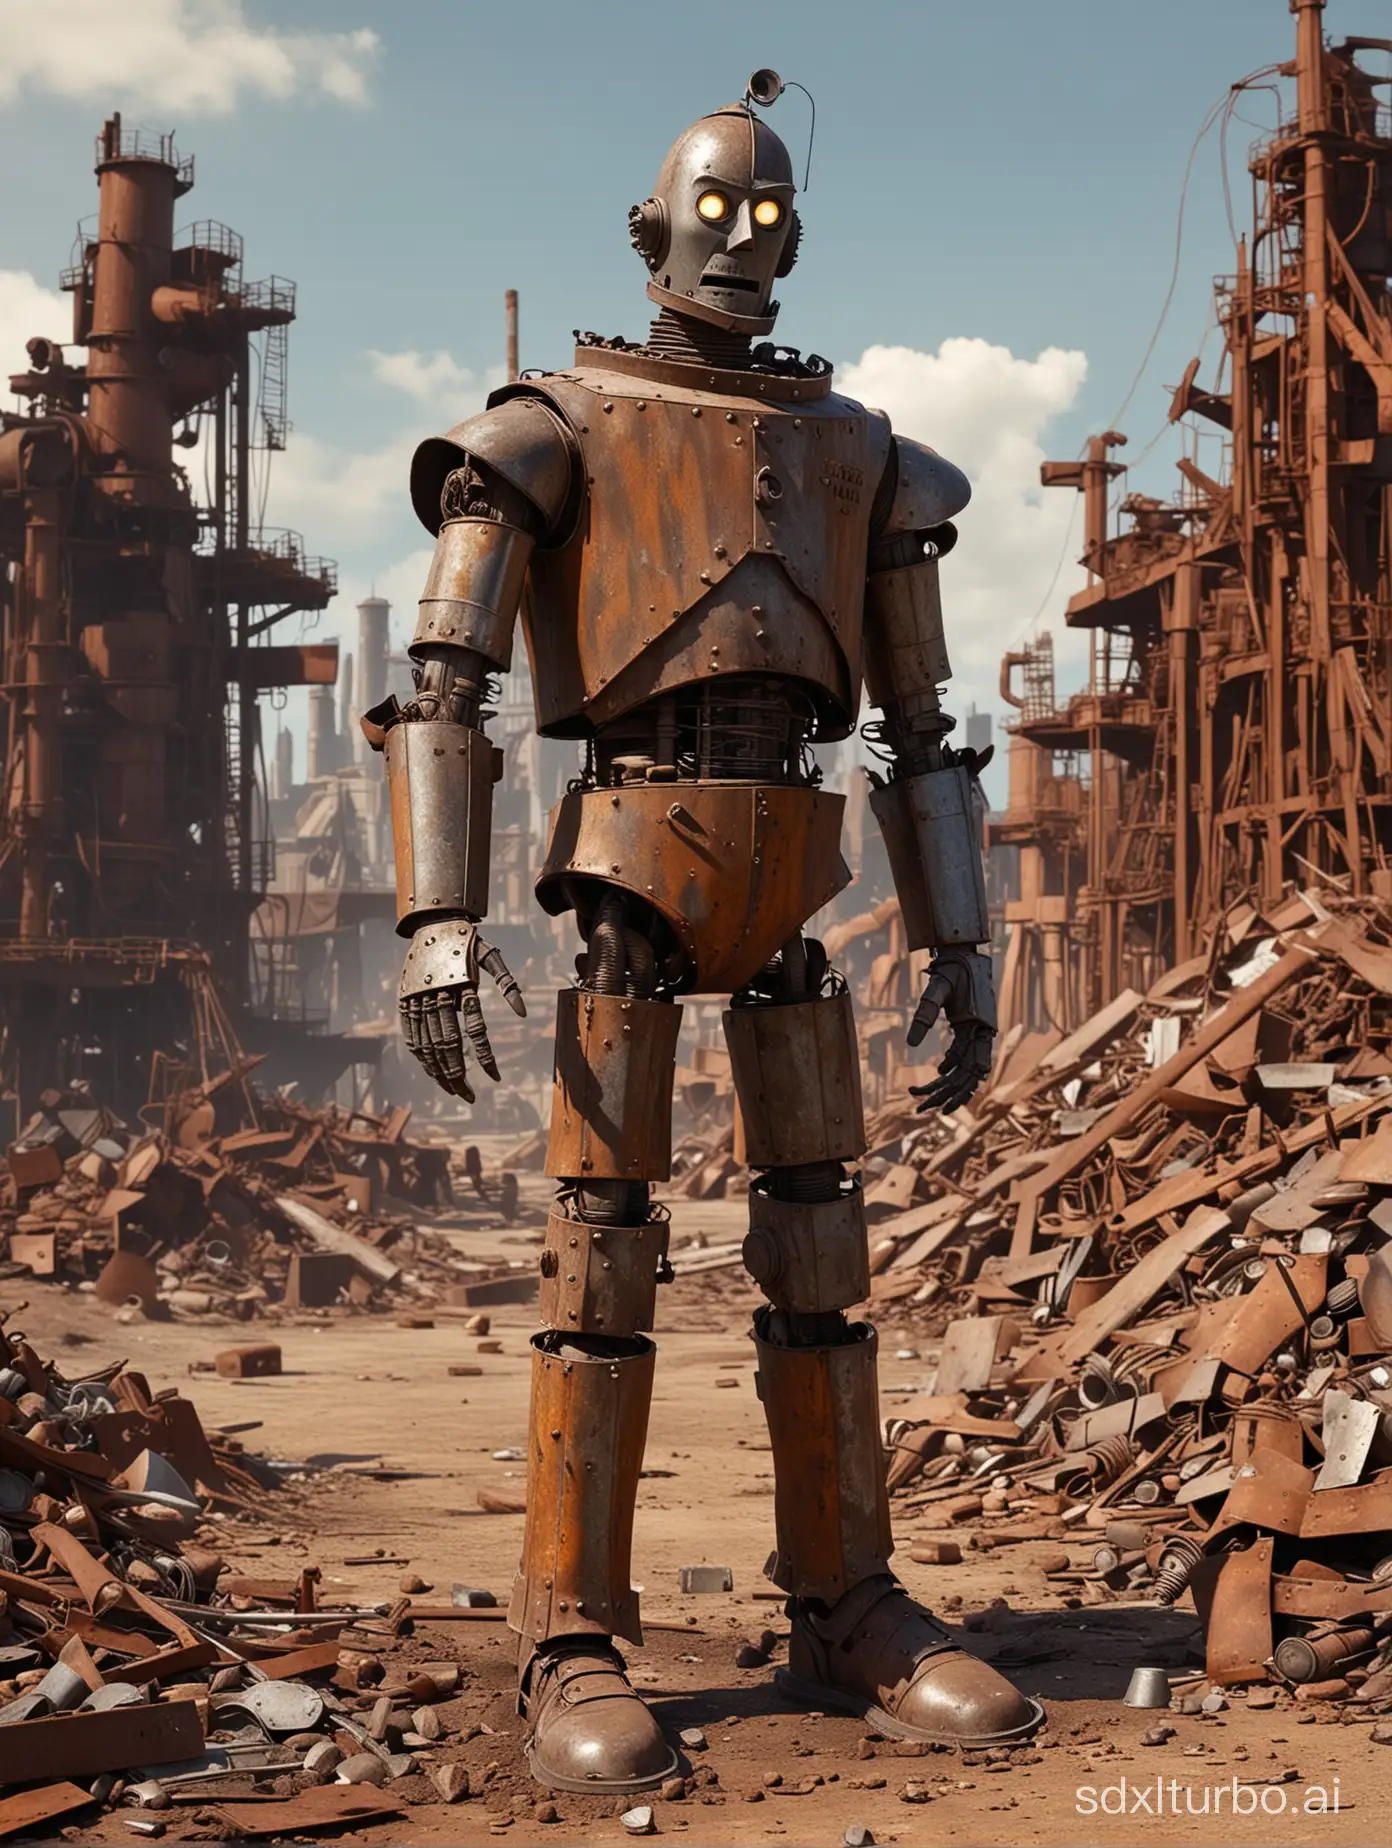 The rusty Tin Man character from The Wizard of Oz is standing upright rusted and abandoned on a pile of rusty scrap metal parts ready to be incinerated in a blast furnace
A highly realistic clear high resolution photo rendering.